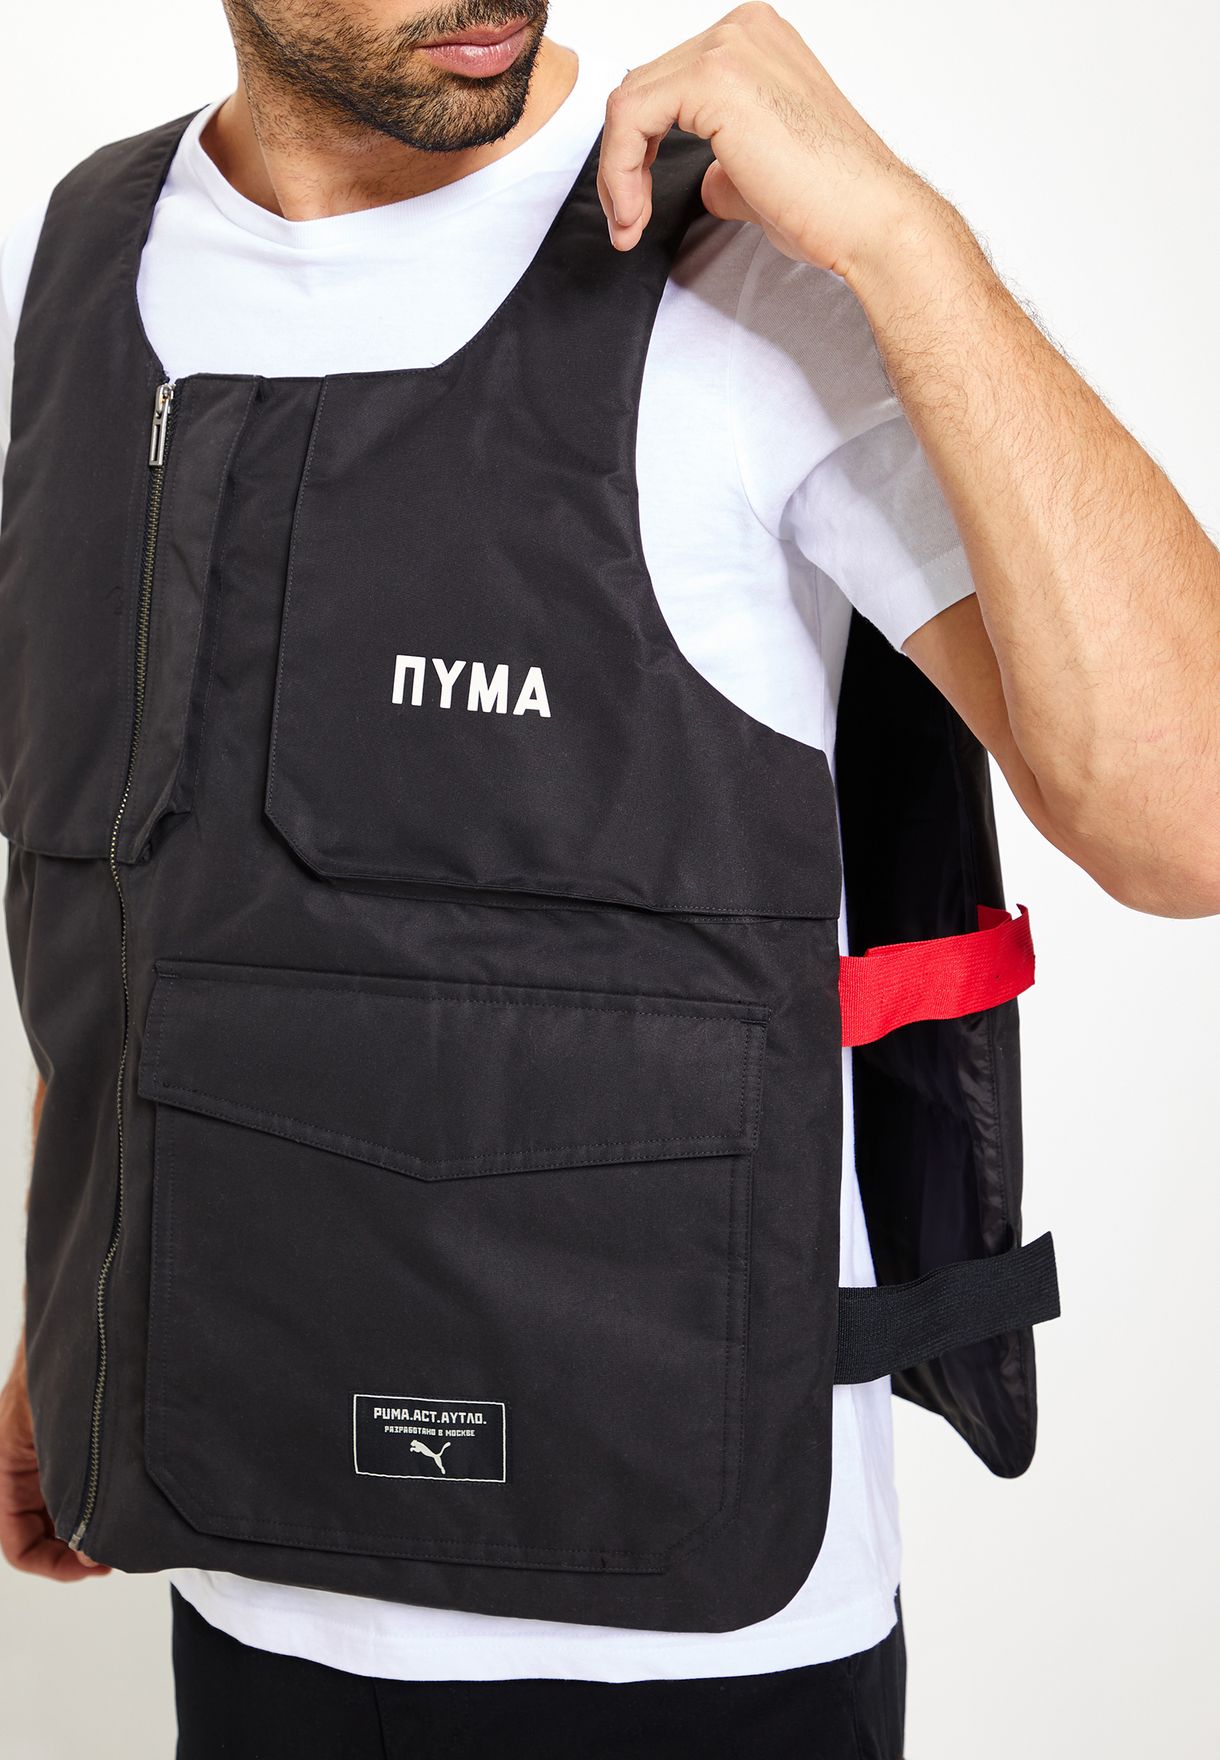 puma x outlaw moscow vest